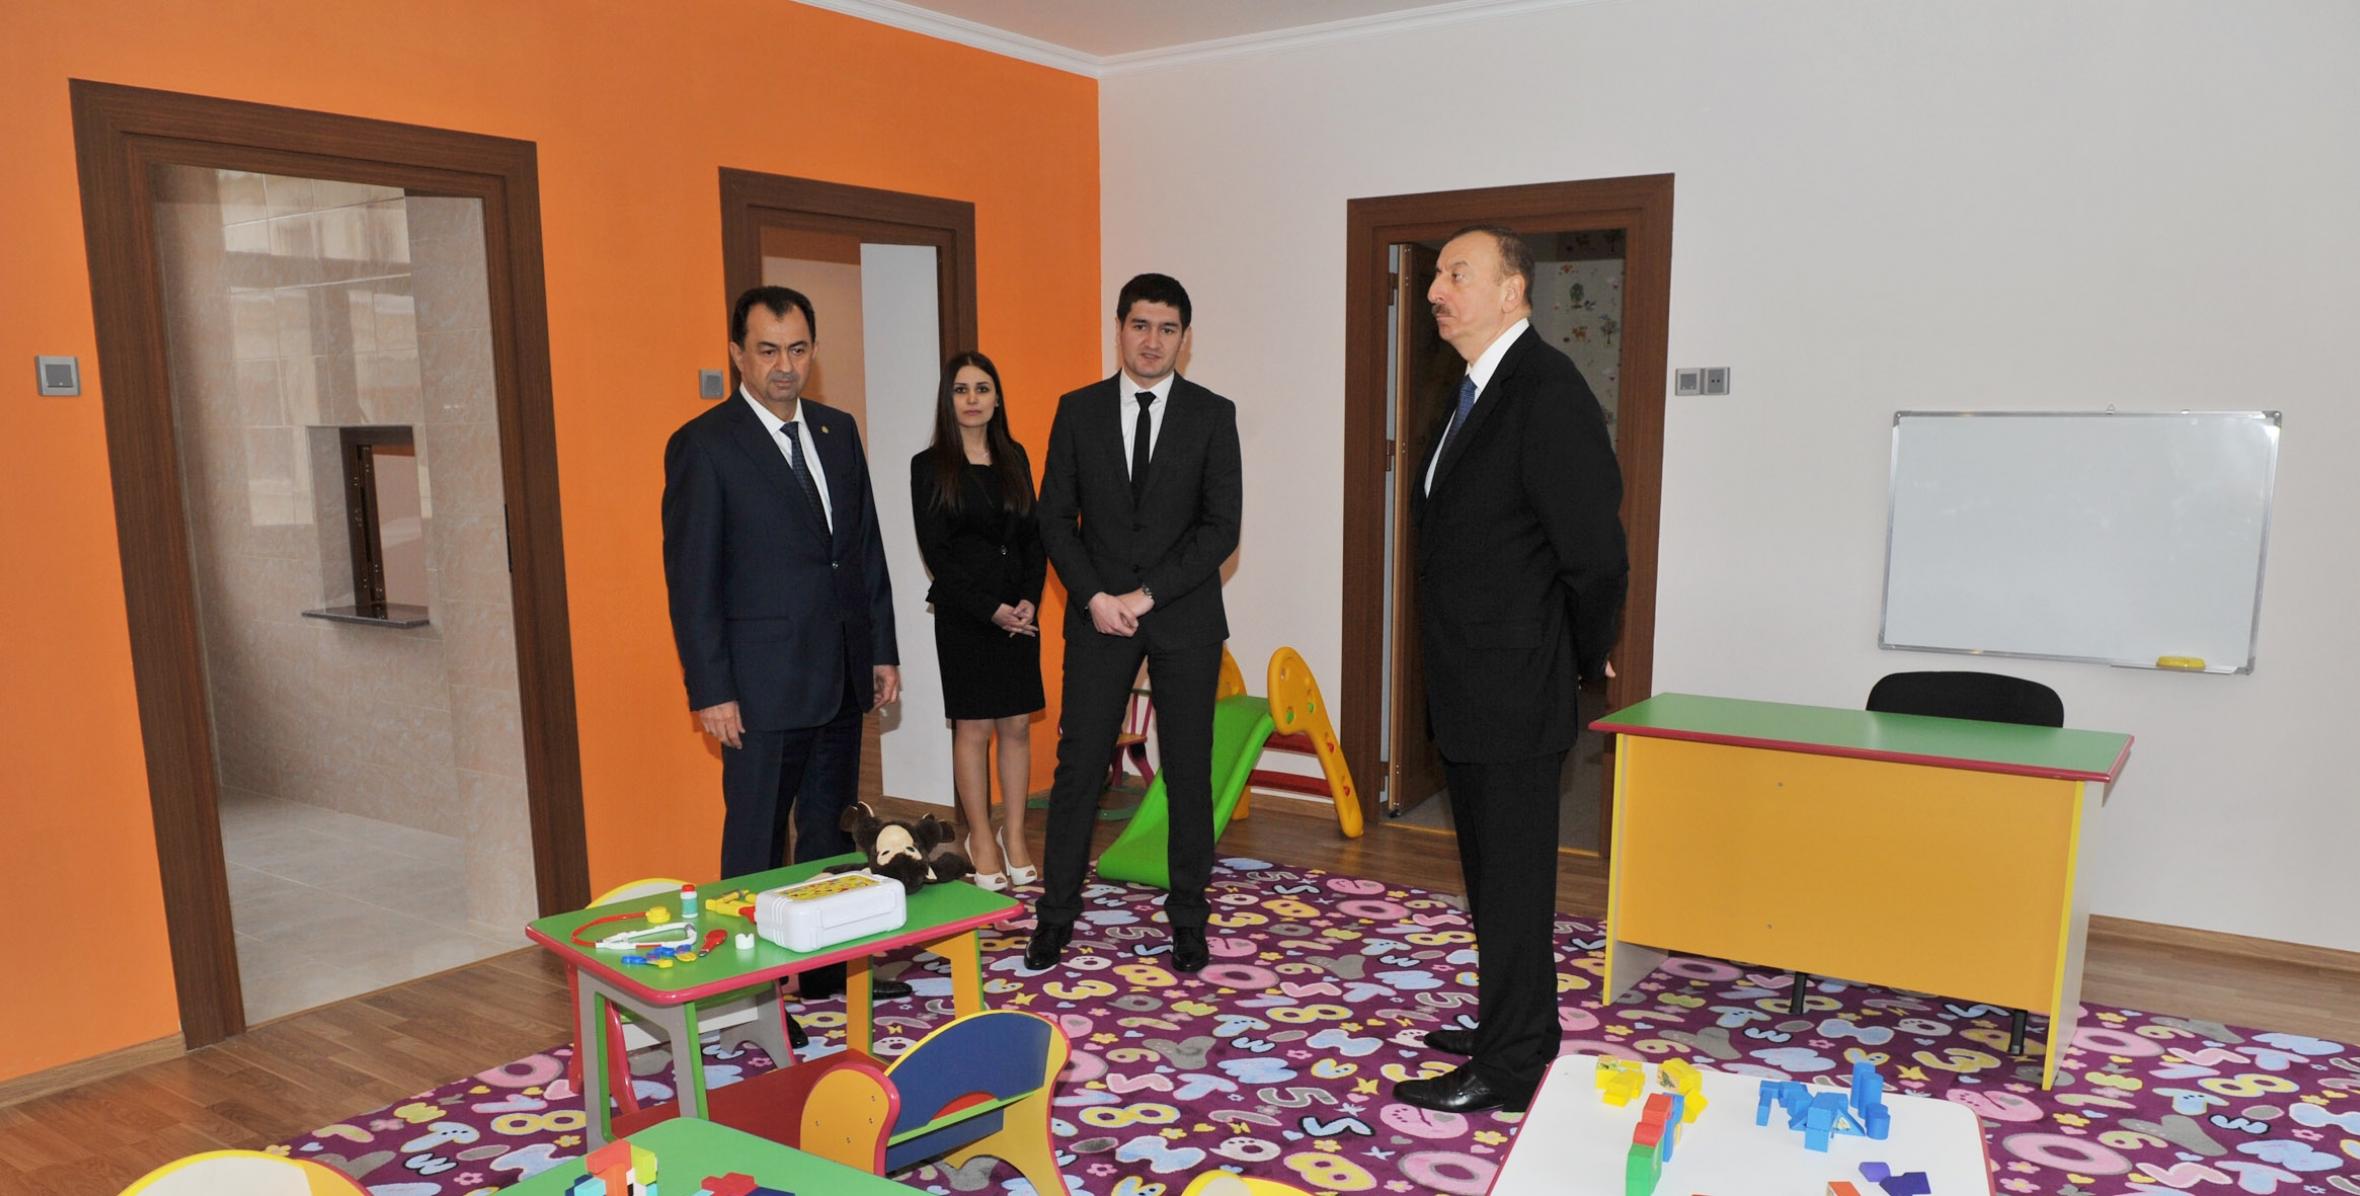 Ilham Aliyev attended the opening of a newly-constructed kindergarten in Lankaran